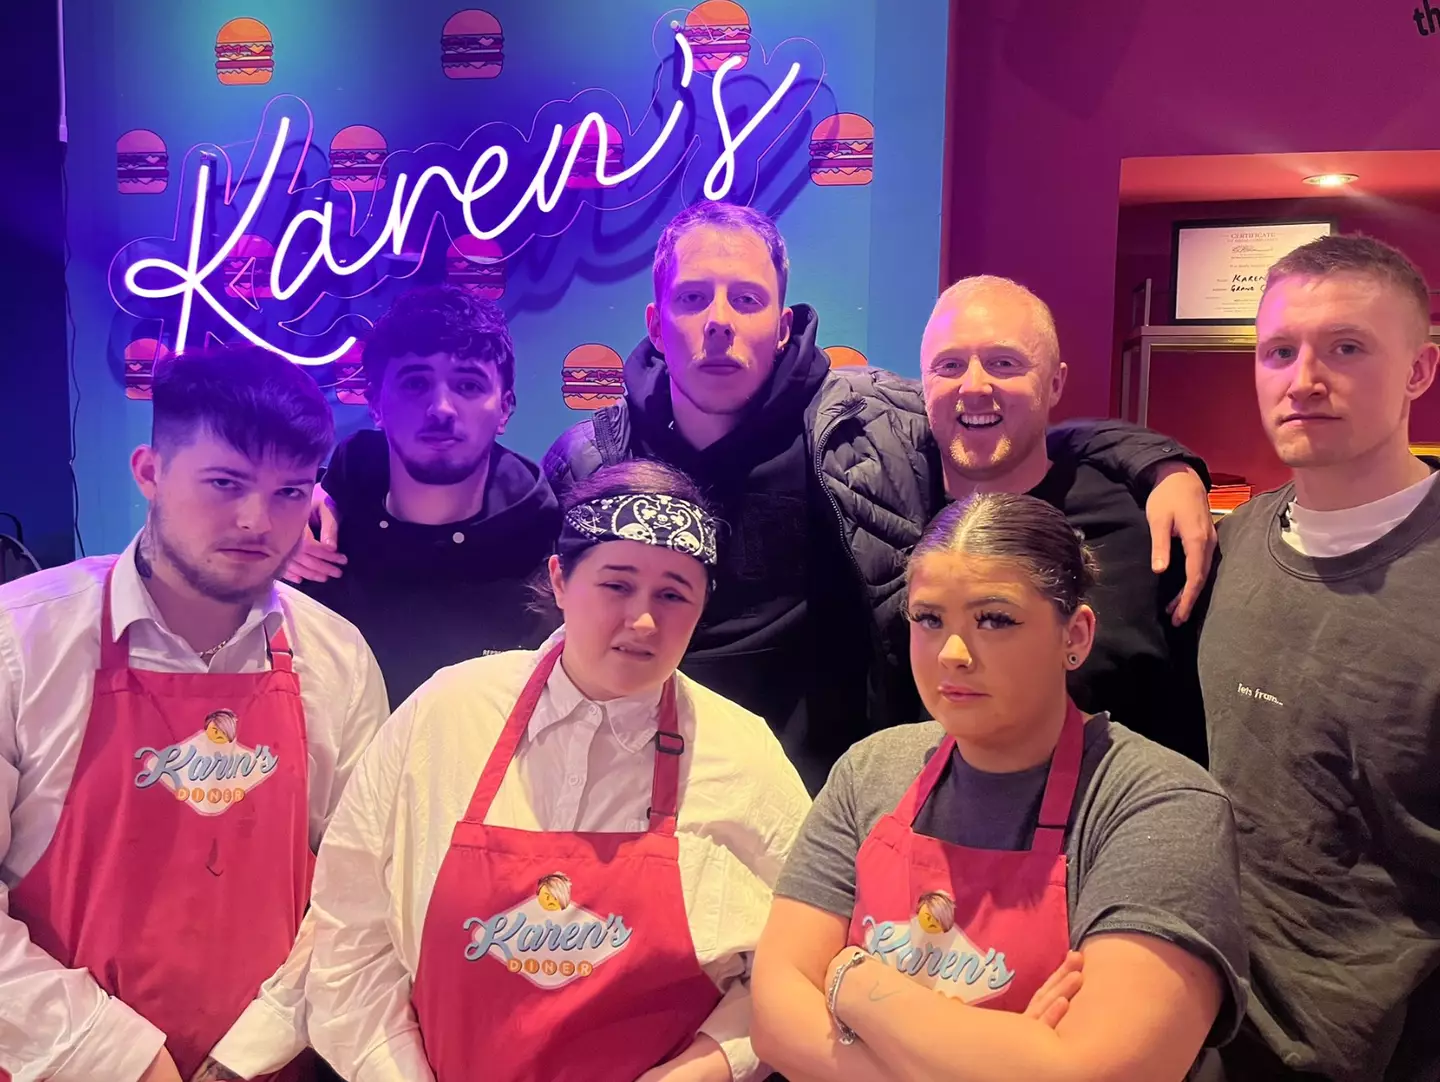 Karen's Diner is certainly an experience.